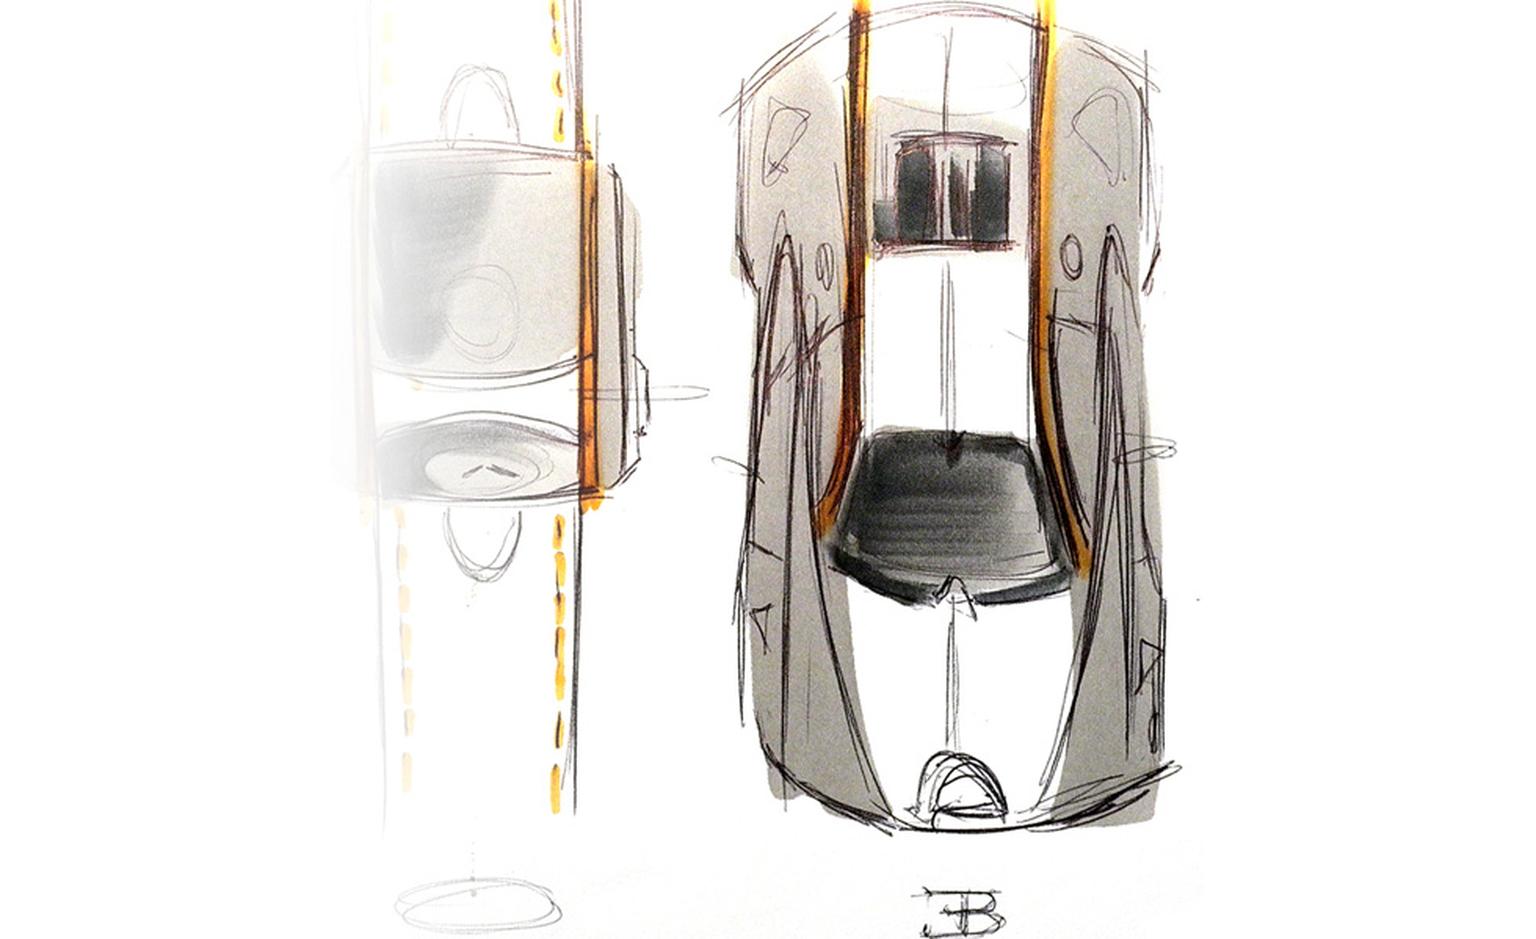 Sketch of the Bugatti Veyron Super Sport car. Both the case shape and components of the watch are clearly inspired by the car.